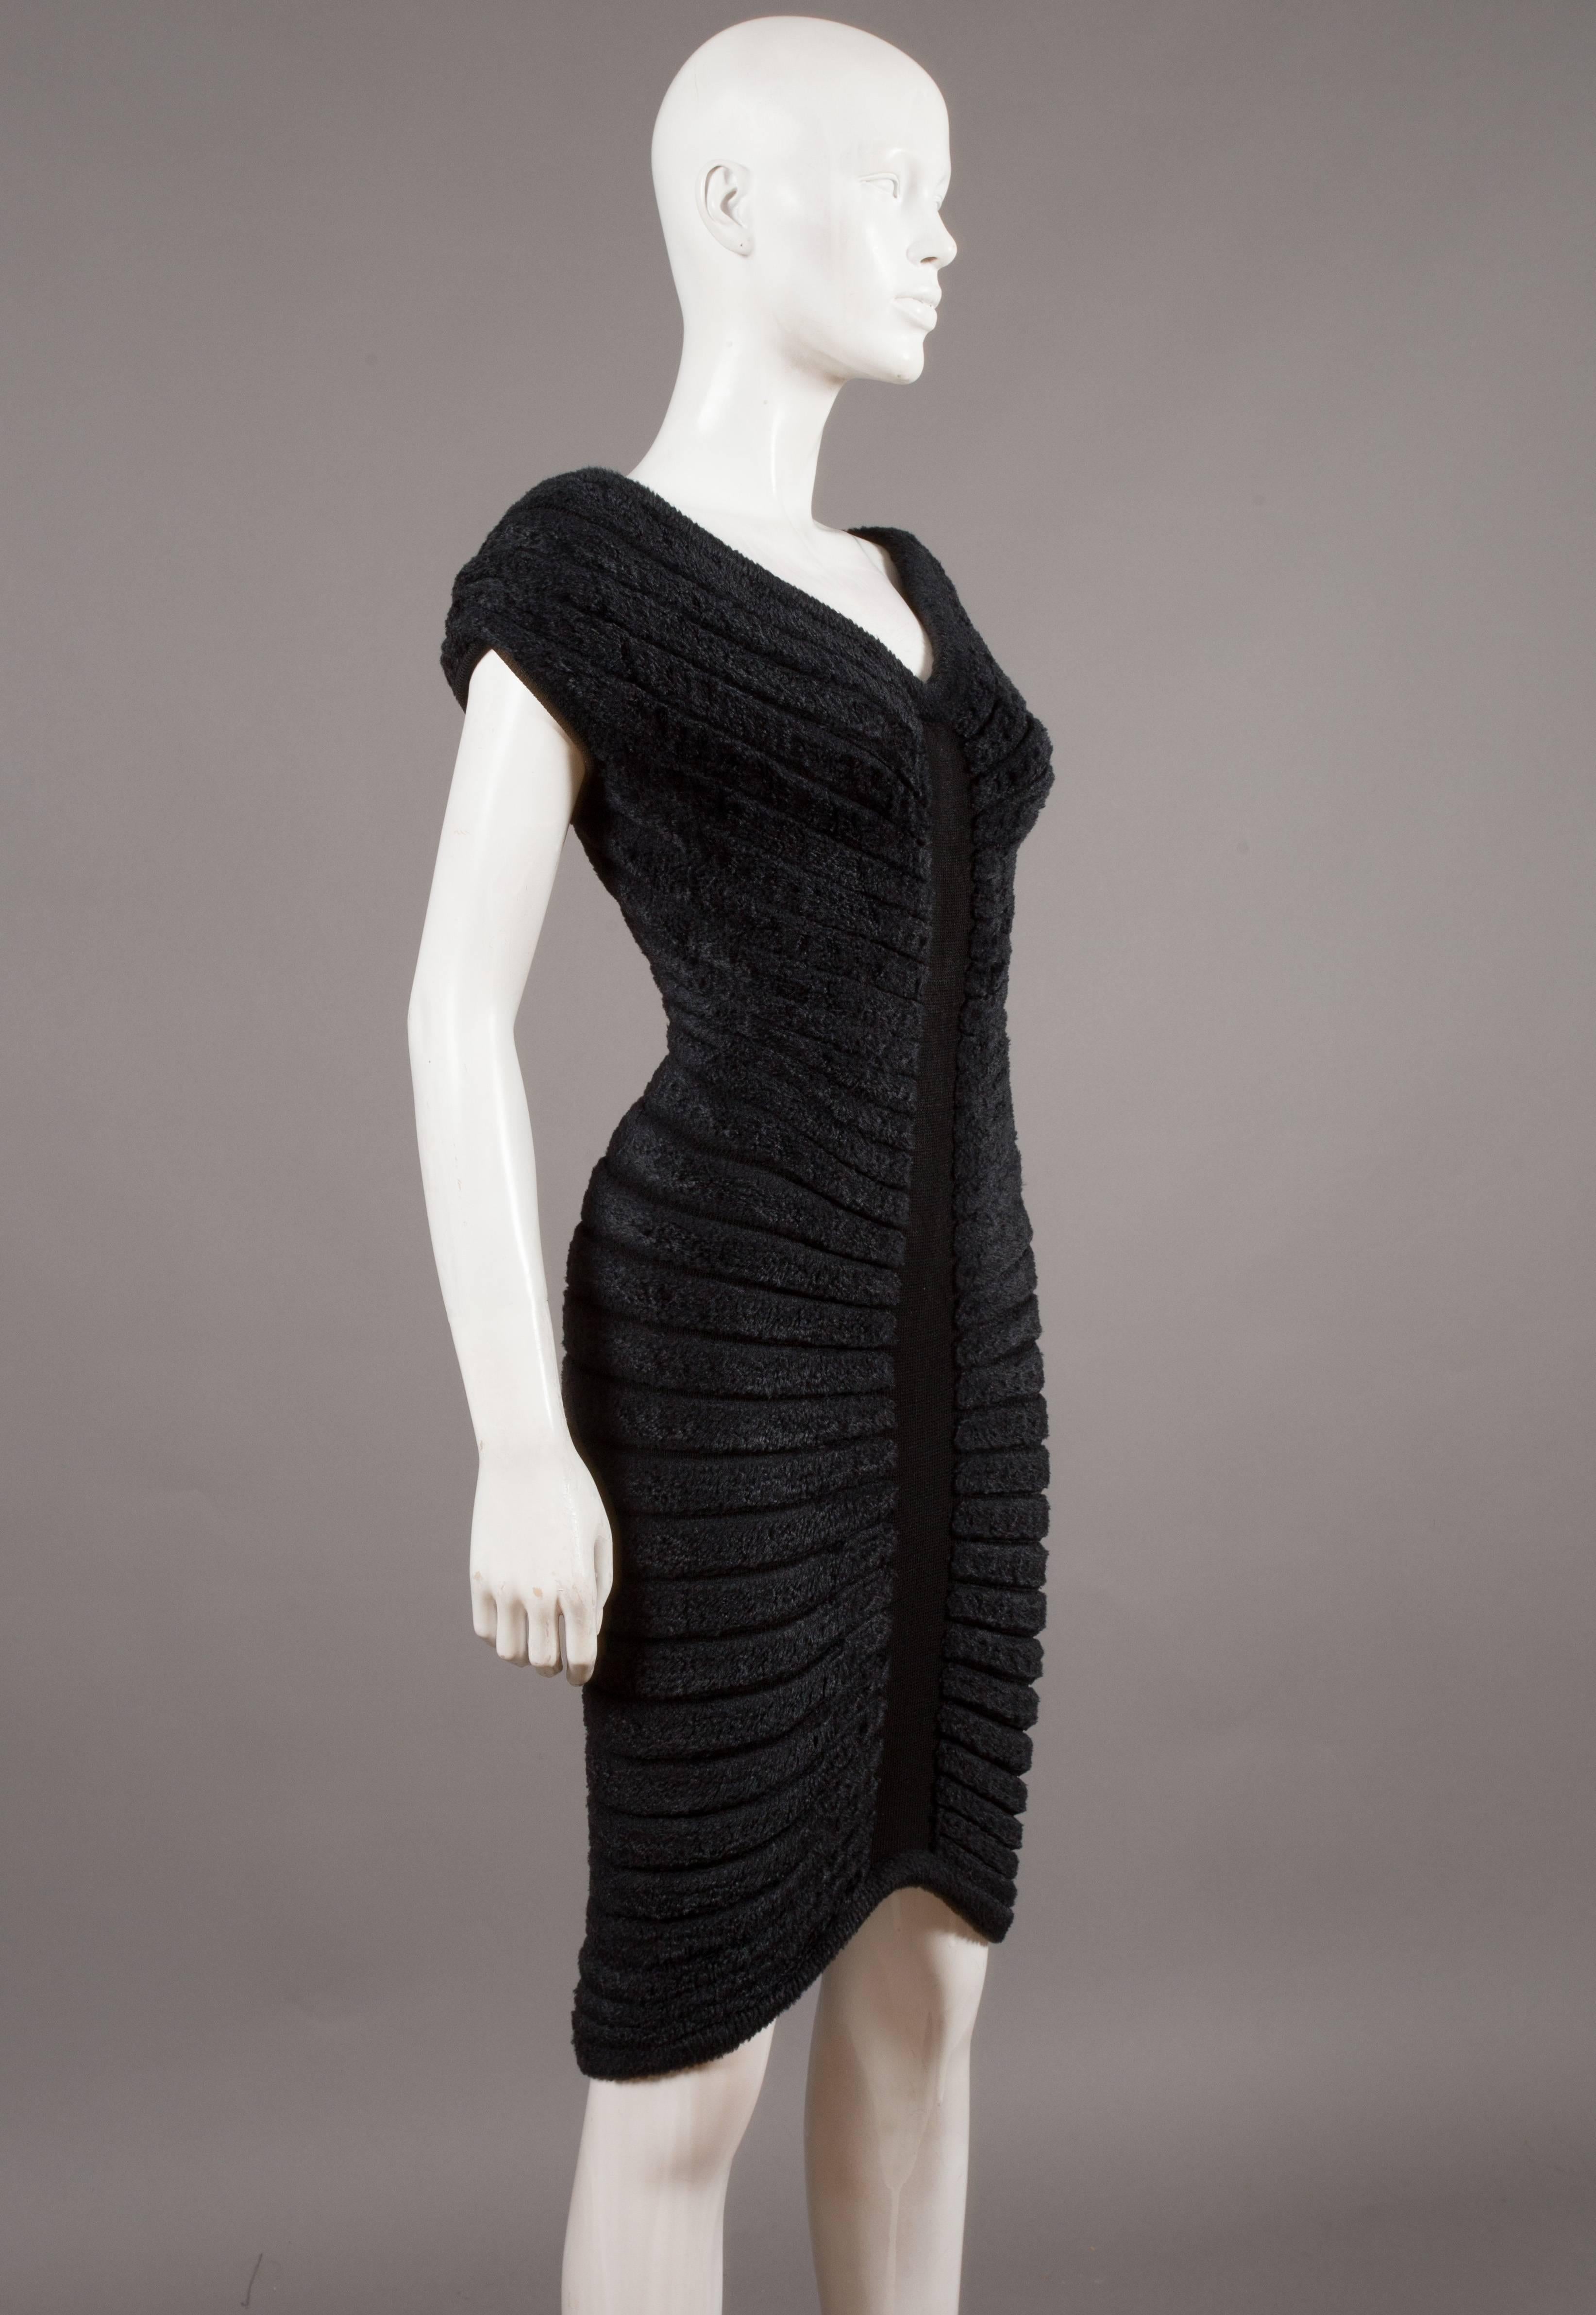 Iconic and rare Alaia black chenille-knitted evening dress, spring-summer, 1994.   Sculpted and figure-hugging with radiating concentric chenille bands.   

